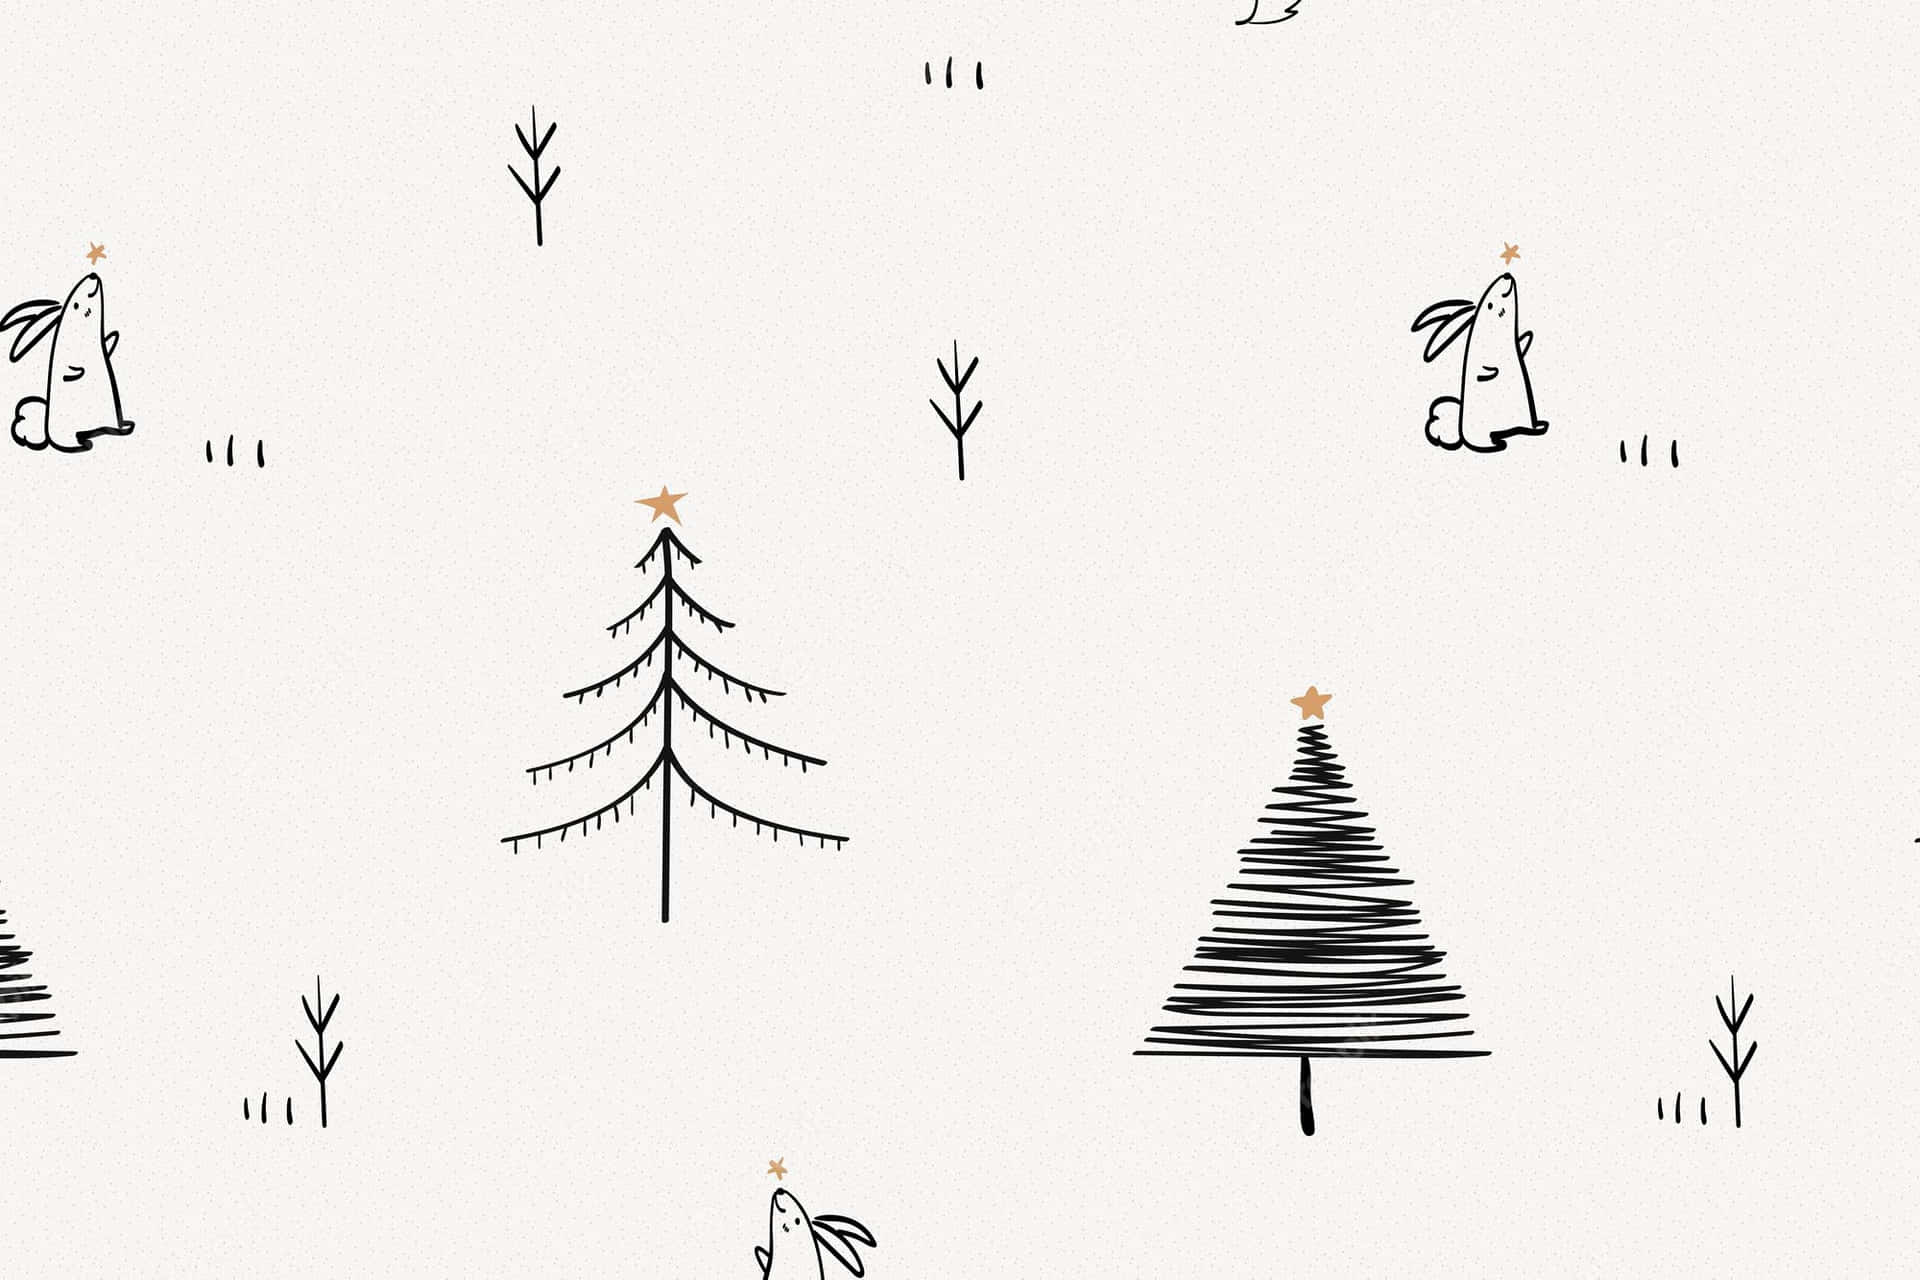 Simple Aesthetic Cute Christmas Trees Drawn With Lines Wallpaper